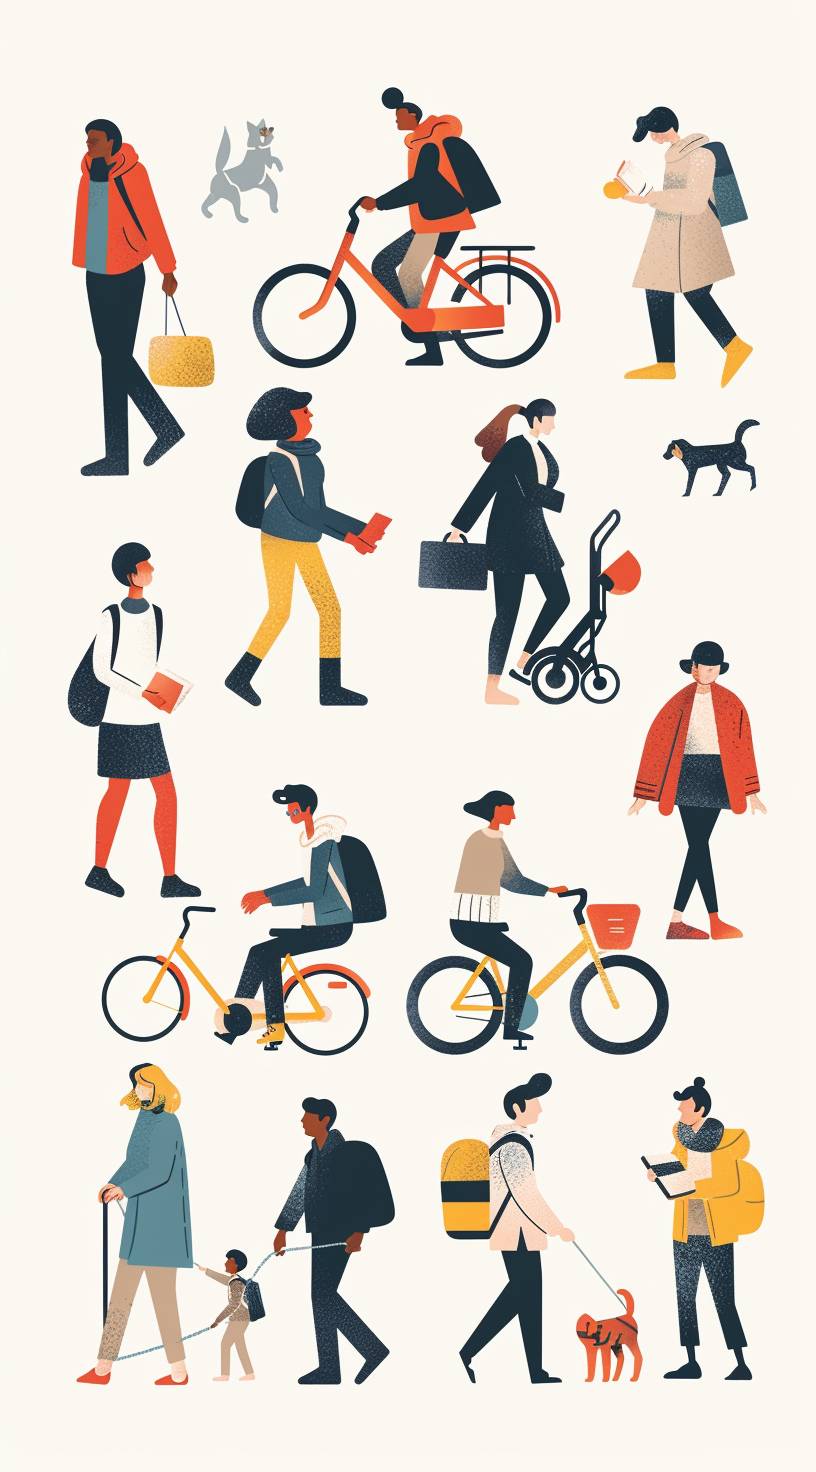 A flat illustration of people in various activities, such as walking with a stocado and dog, riding bicycles or reading books. The people should be diverse in age, gender and skin tone. The background is white to highlight the characters and their actions. There is no text on it so that attention can focus only on the human figures. A single color scheme for all elements would make them stand out more clearly against each other. In the style of flat design and minimalist design.